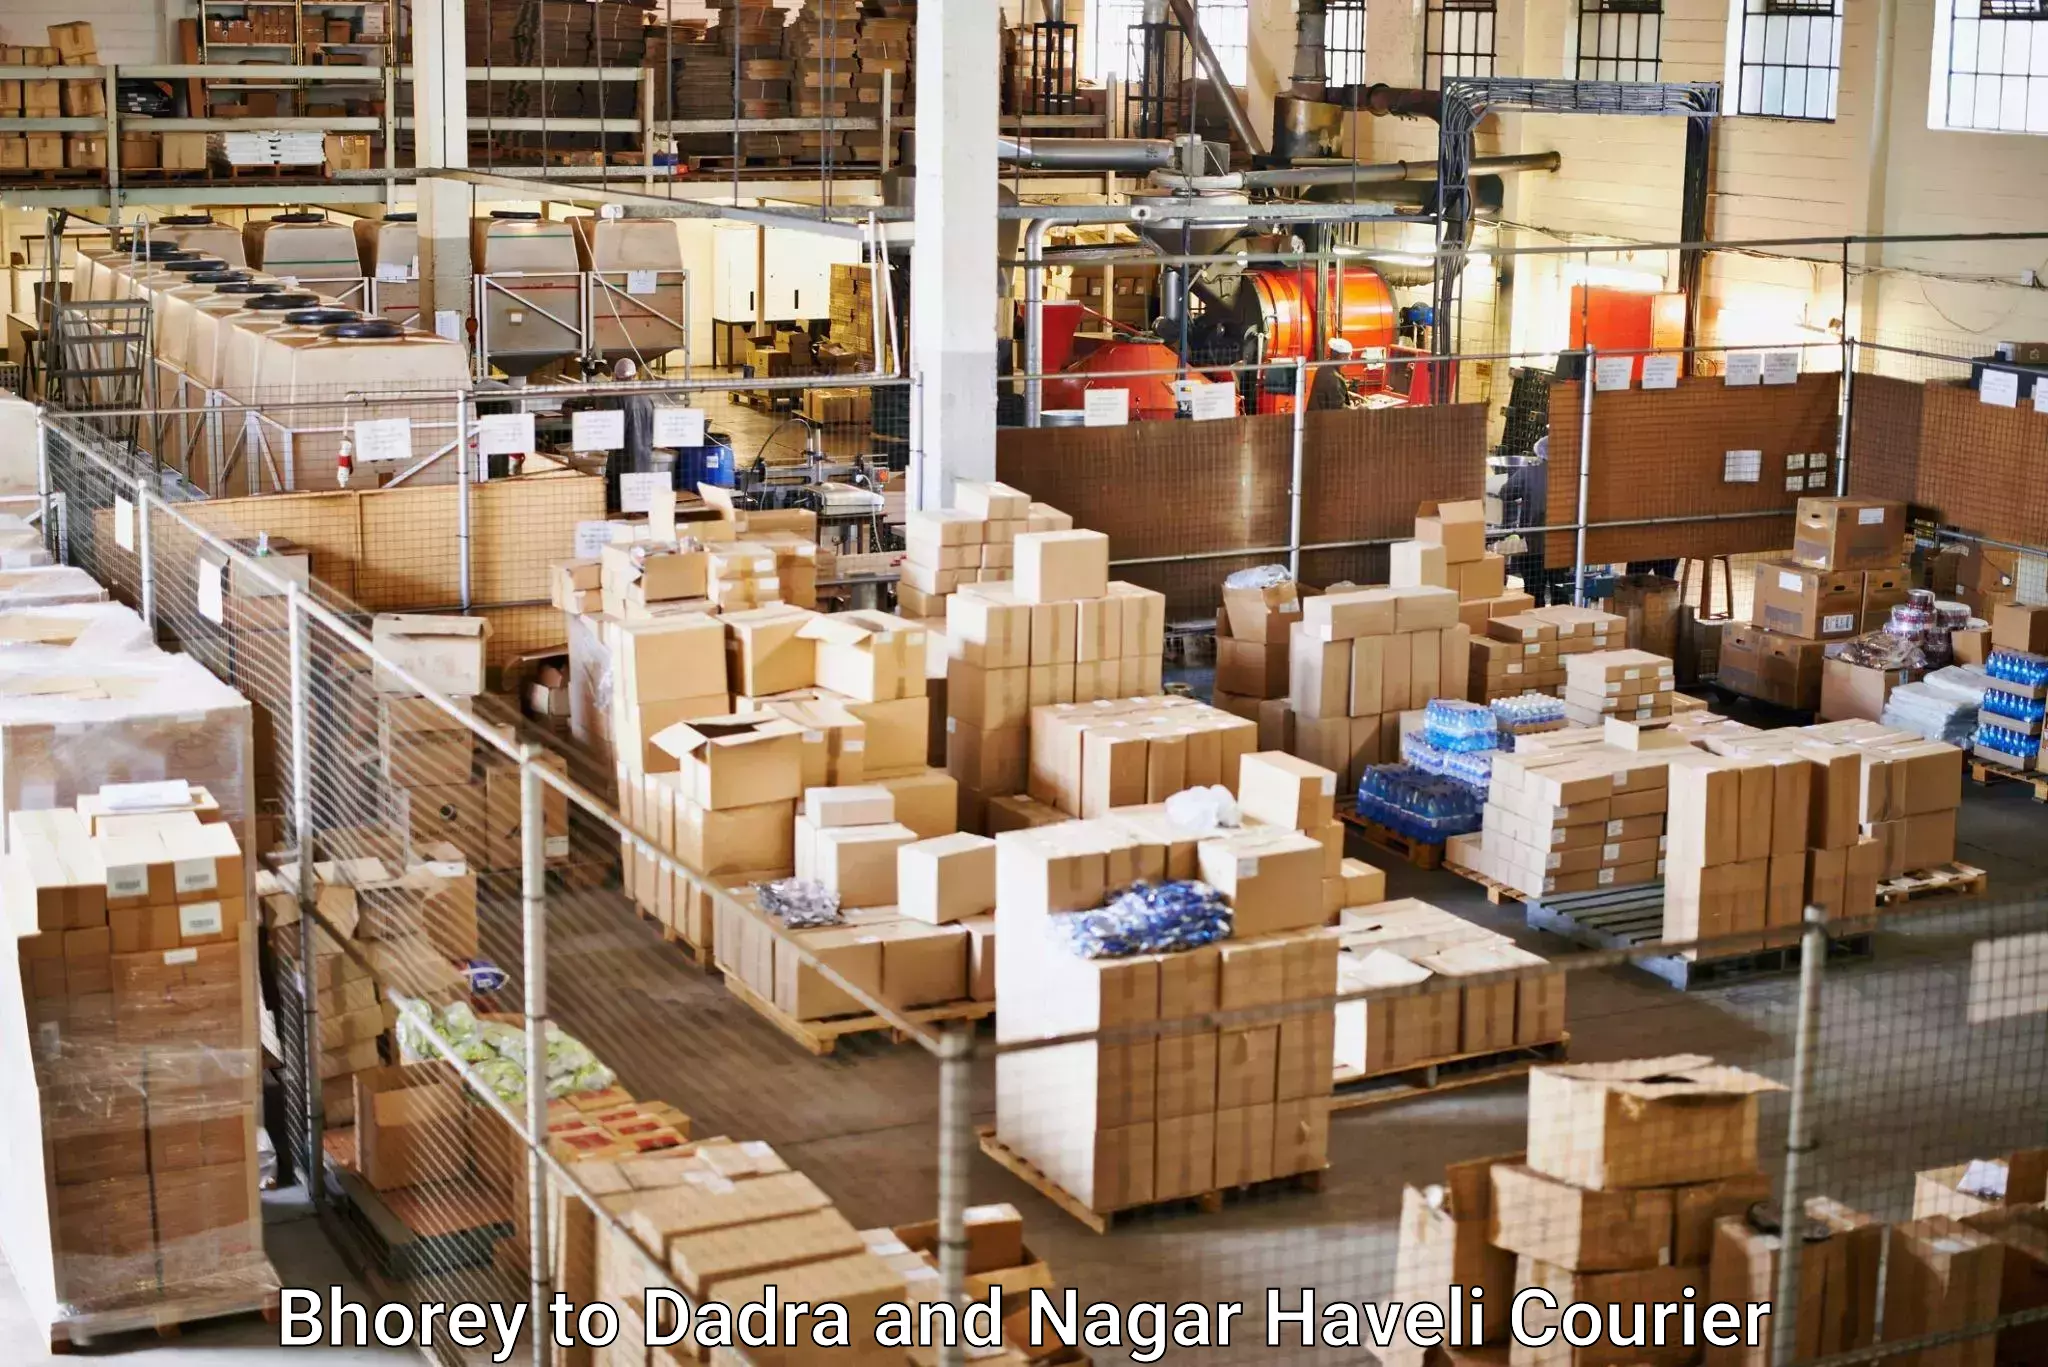 Courier service efficiency in Bhorey to Dadra and Nagar Haveli